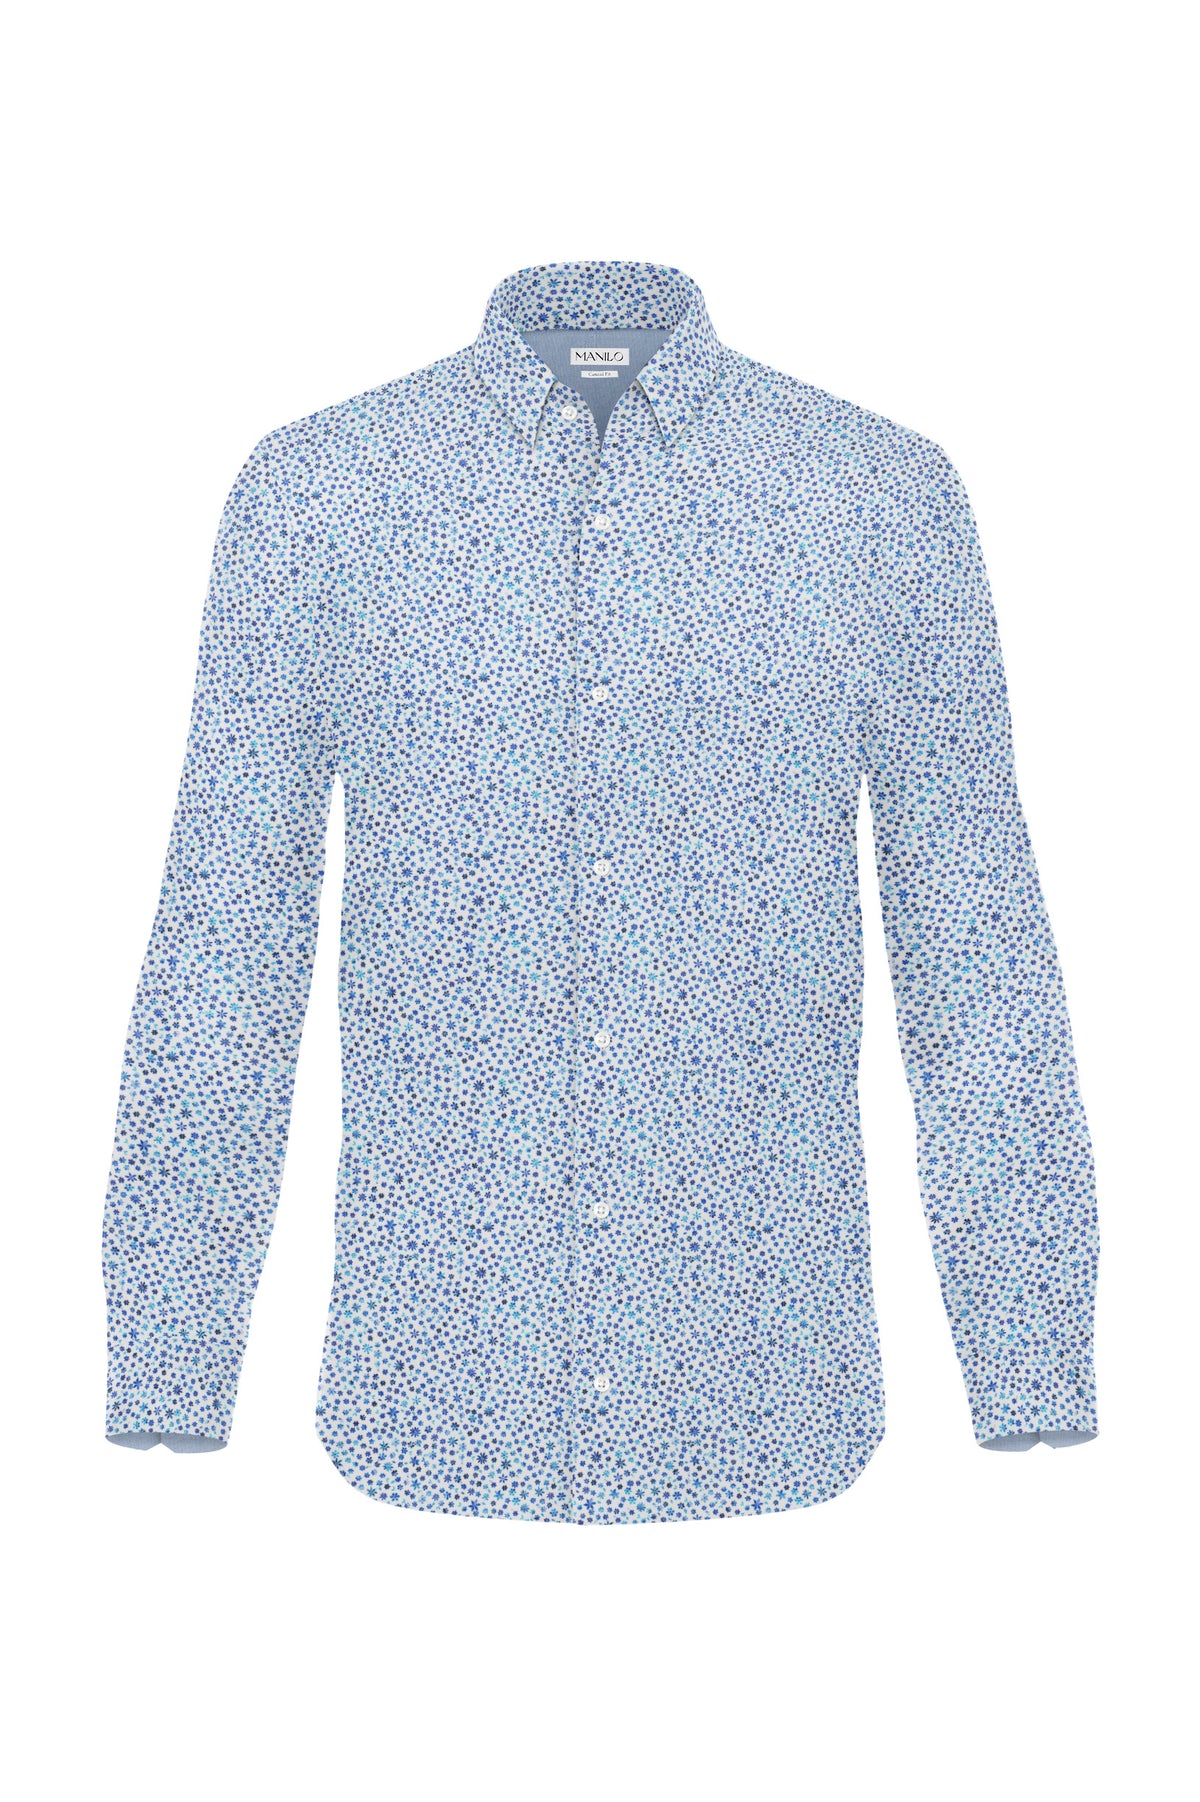 Casual shirt with floral pattern in white (Art. 2218-C)